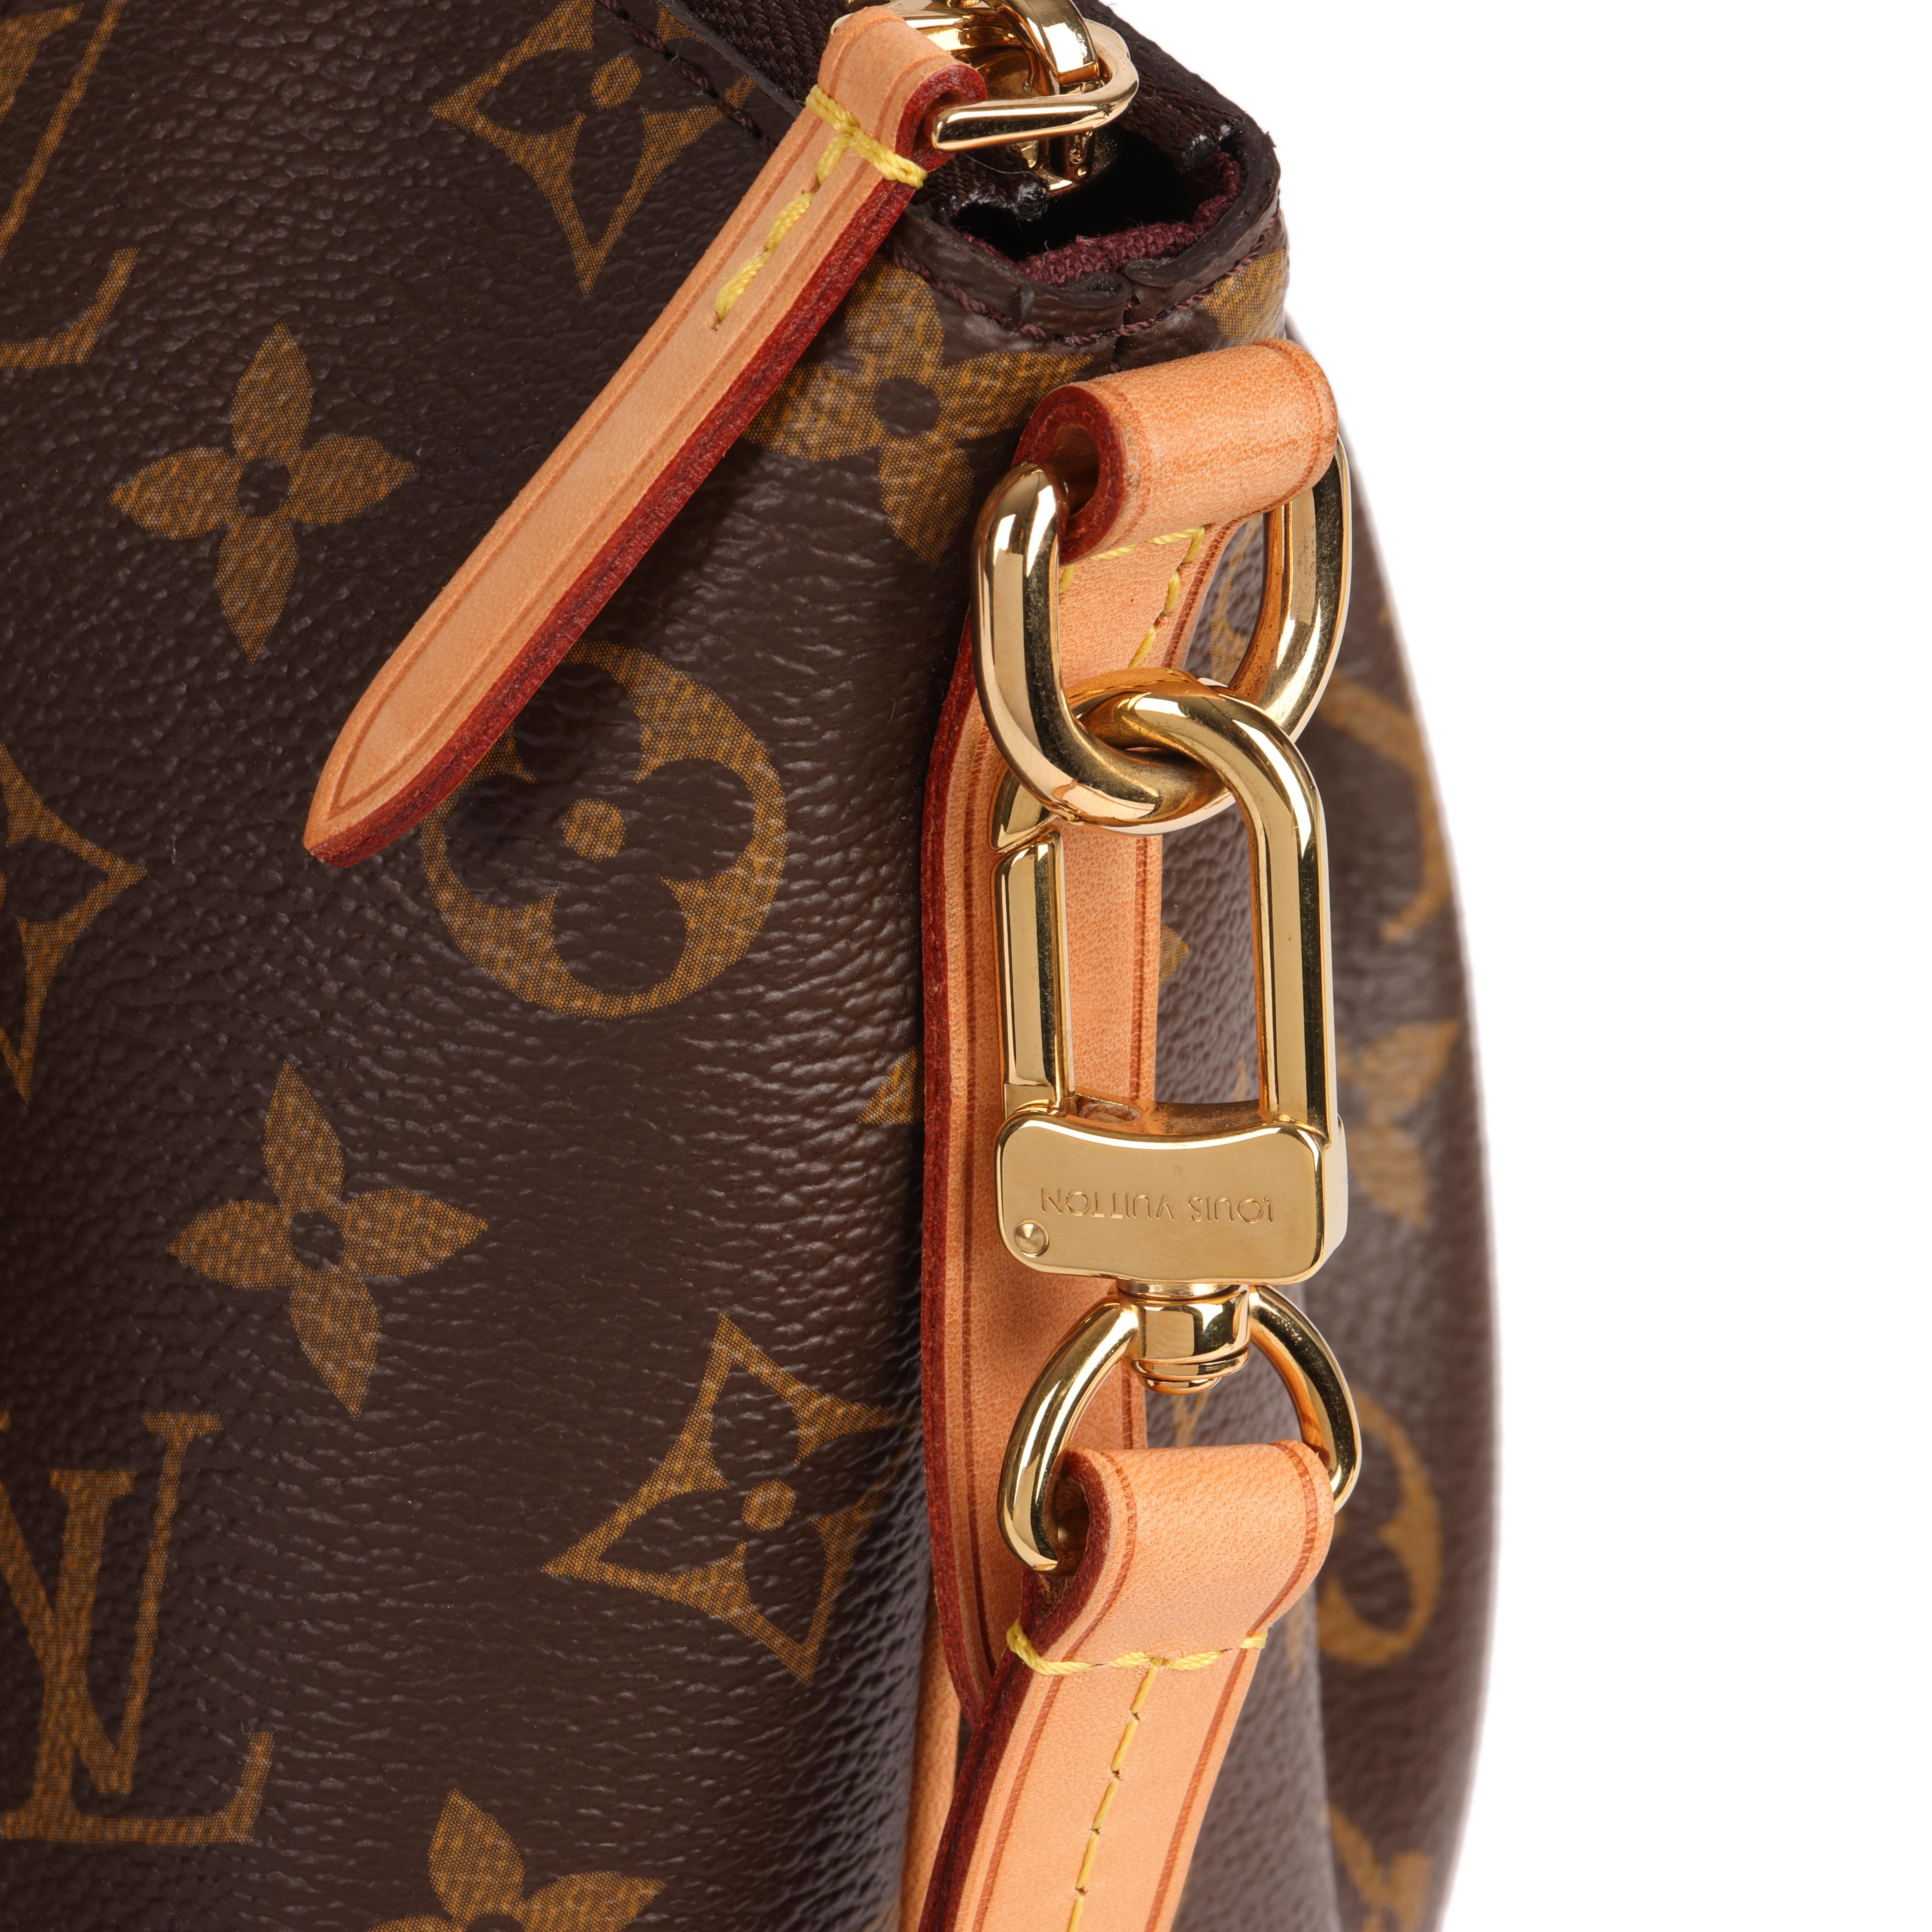 LOUIS VUITTON
Brown Monogram Coated Canvas & Vachetta Leather Turenne MM

Serial Number: MB1135
Age (Circa): 2015
Accompanied By: Louis Vuitton Dust Bag, Shoulder Strap
Authenticity Details: Date Stamp (Made in France)
Gender: Ladies
Type: Tote,